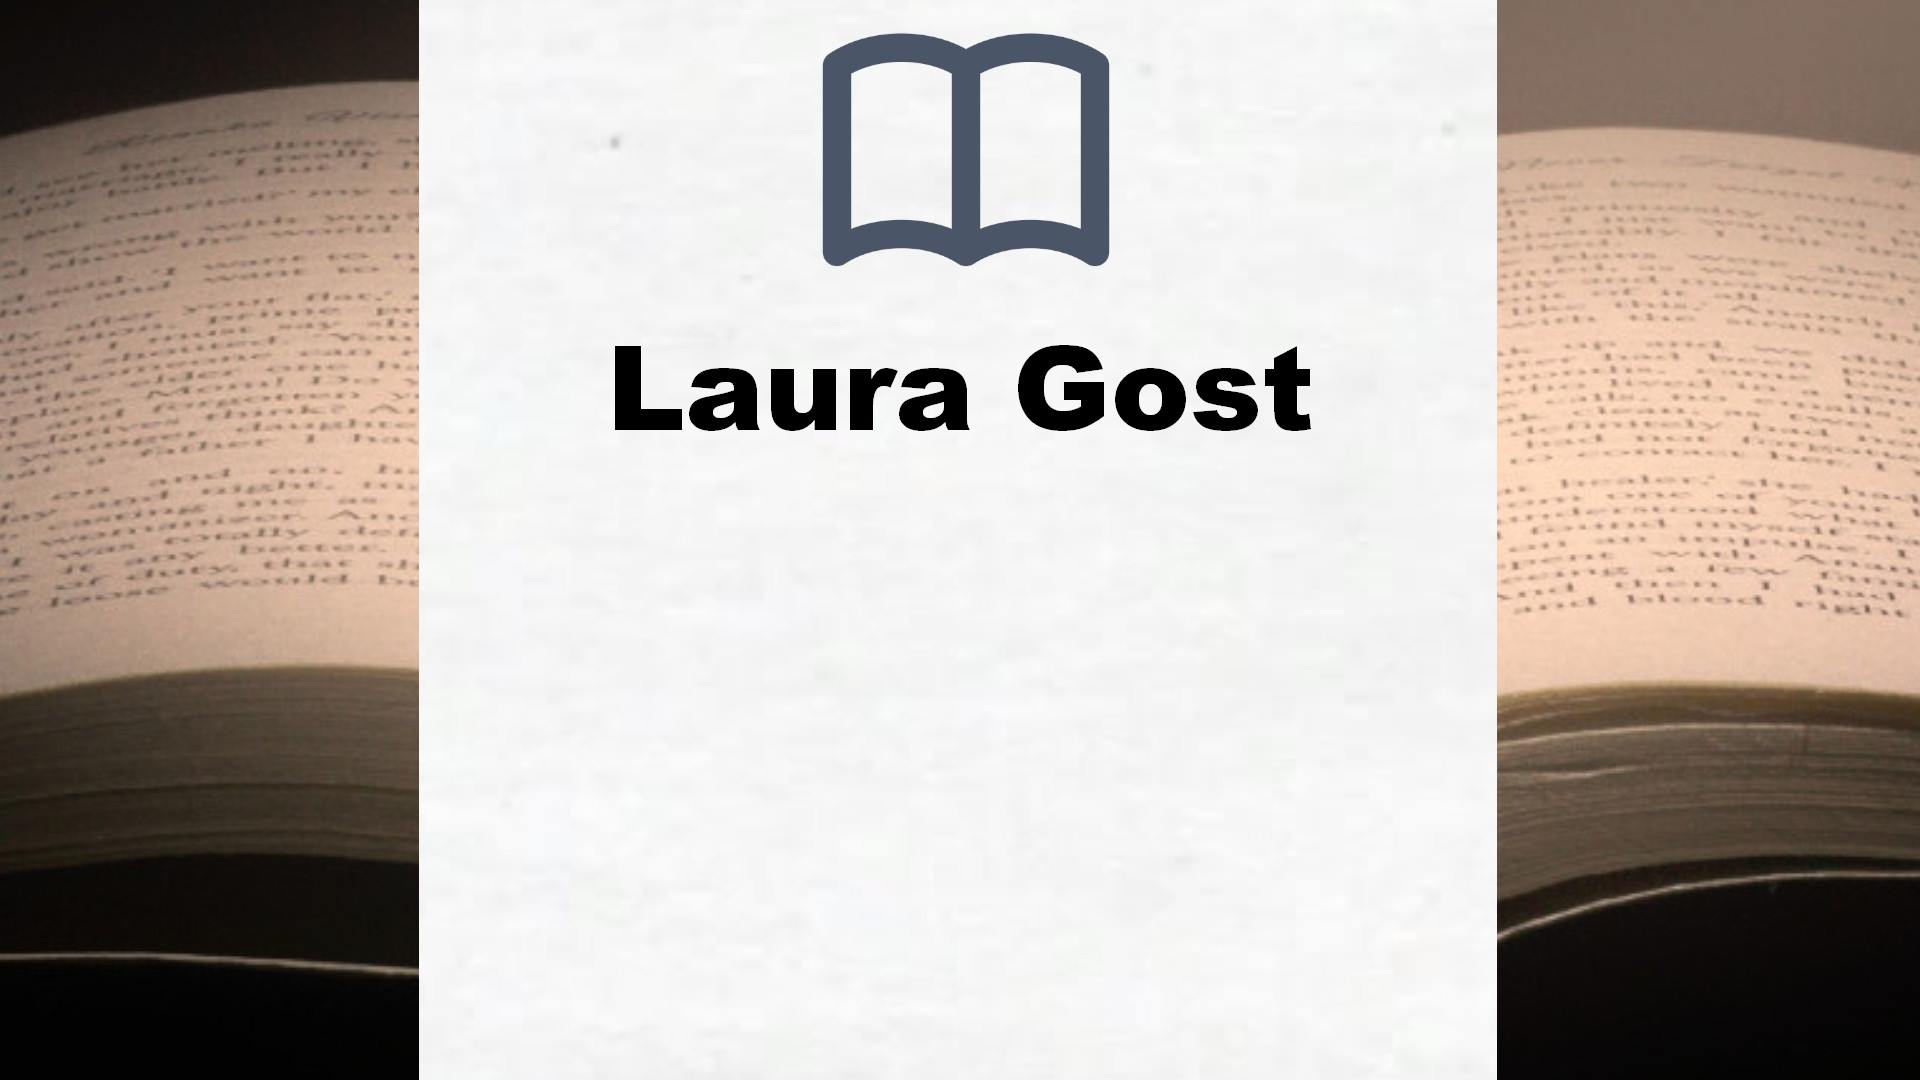 Libros Laura Gost